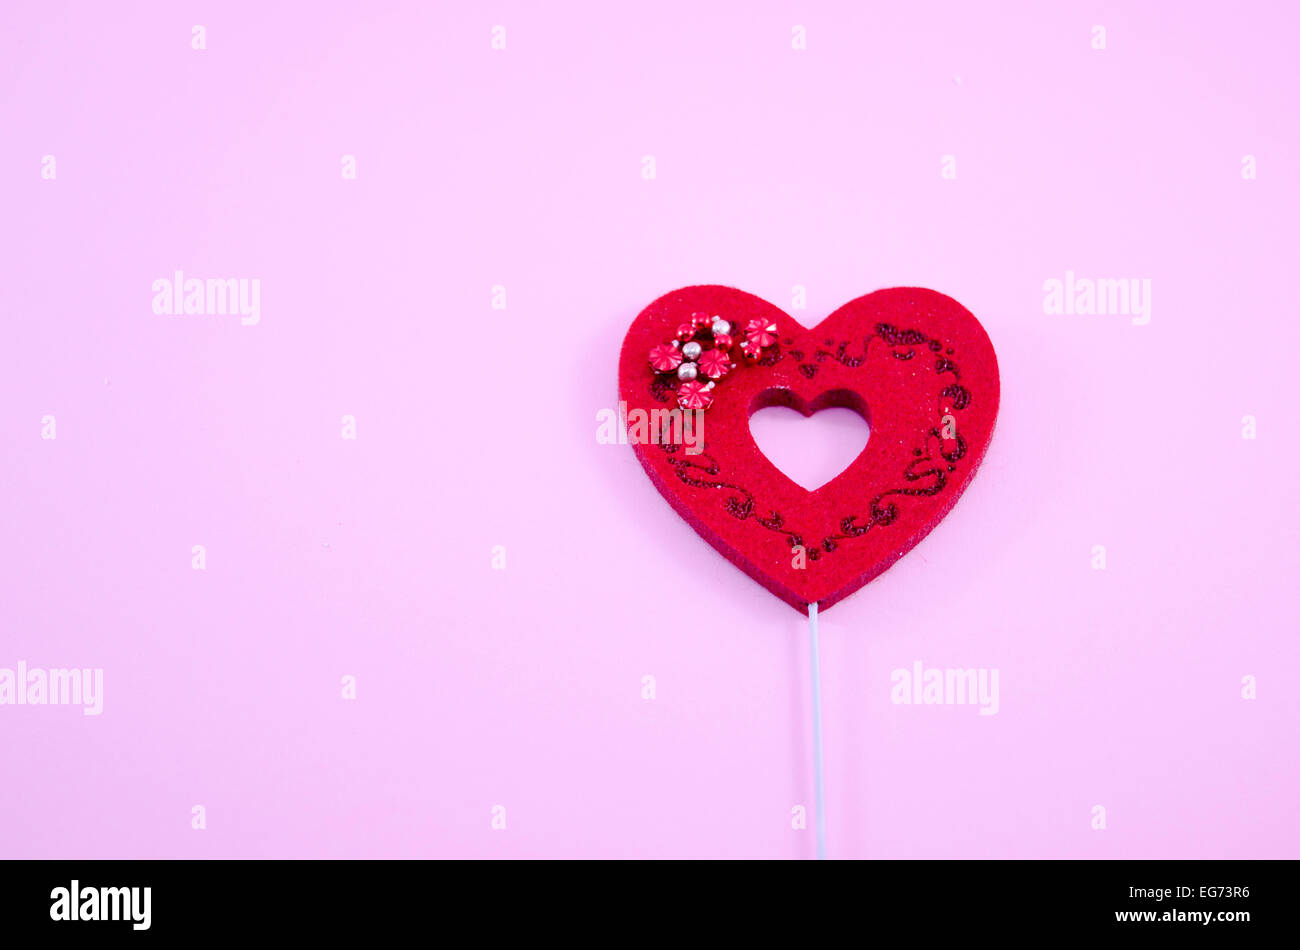 Red engraved heart on pink paper with some shiny pearls Stock Photo